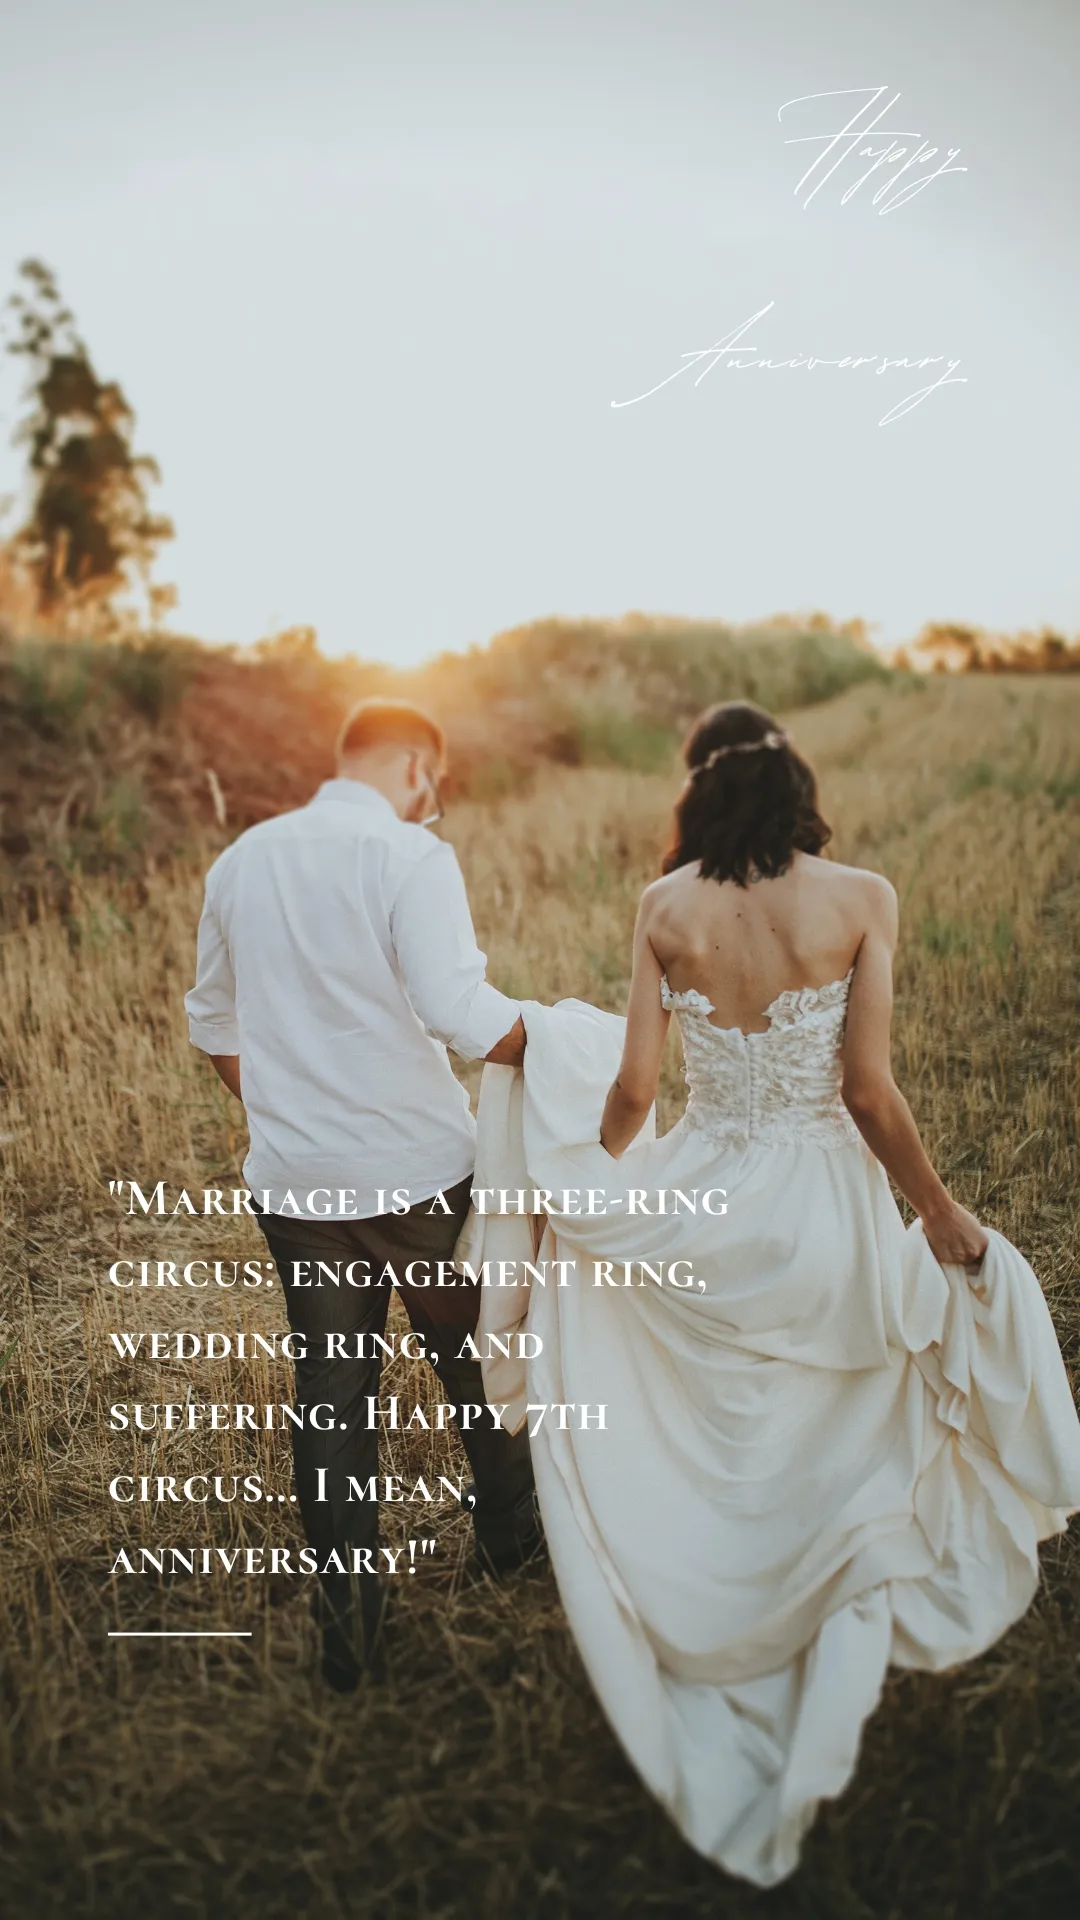 7 years of marriage quotes